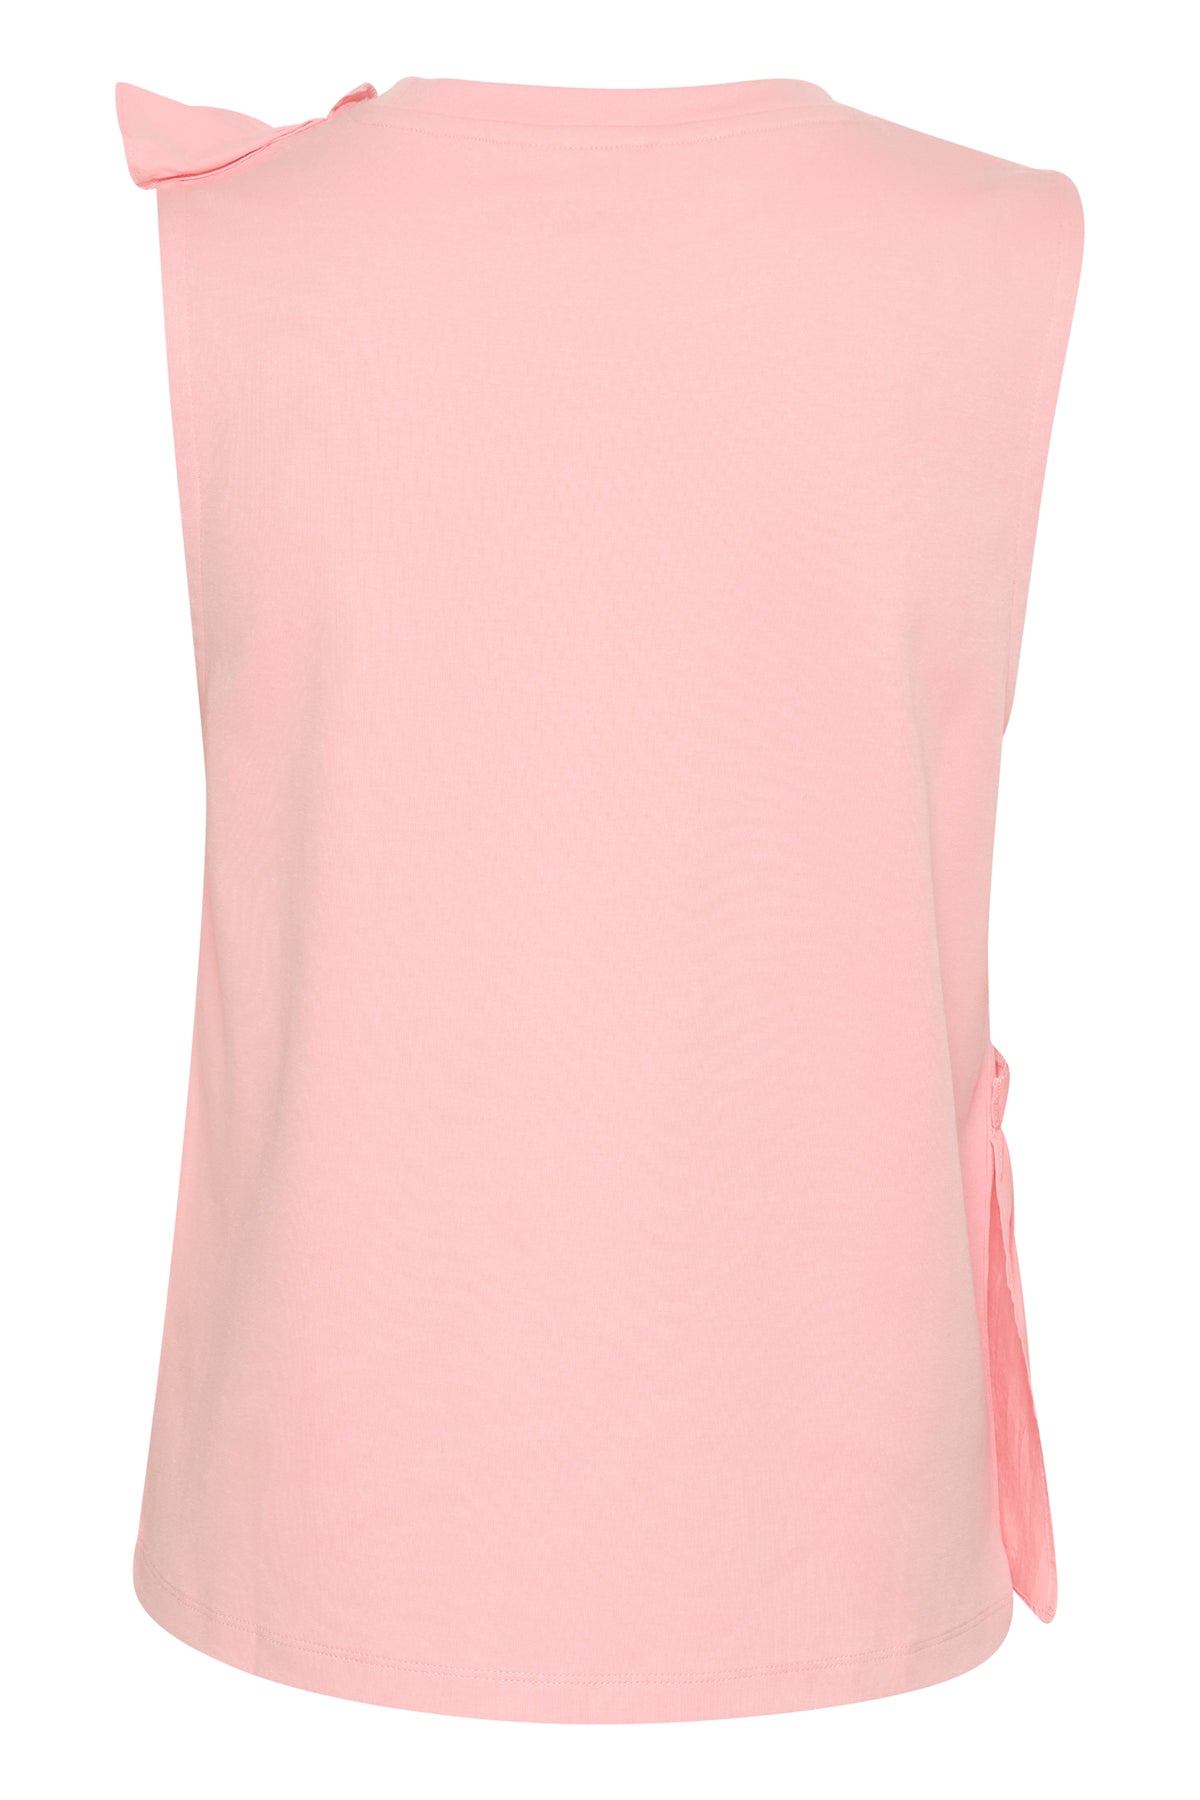 30308794 Mellow Rose Part Two Julieve Top